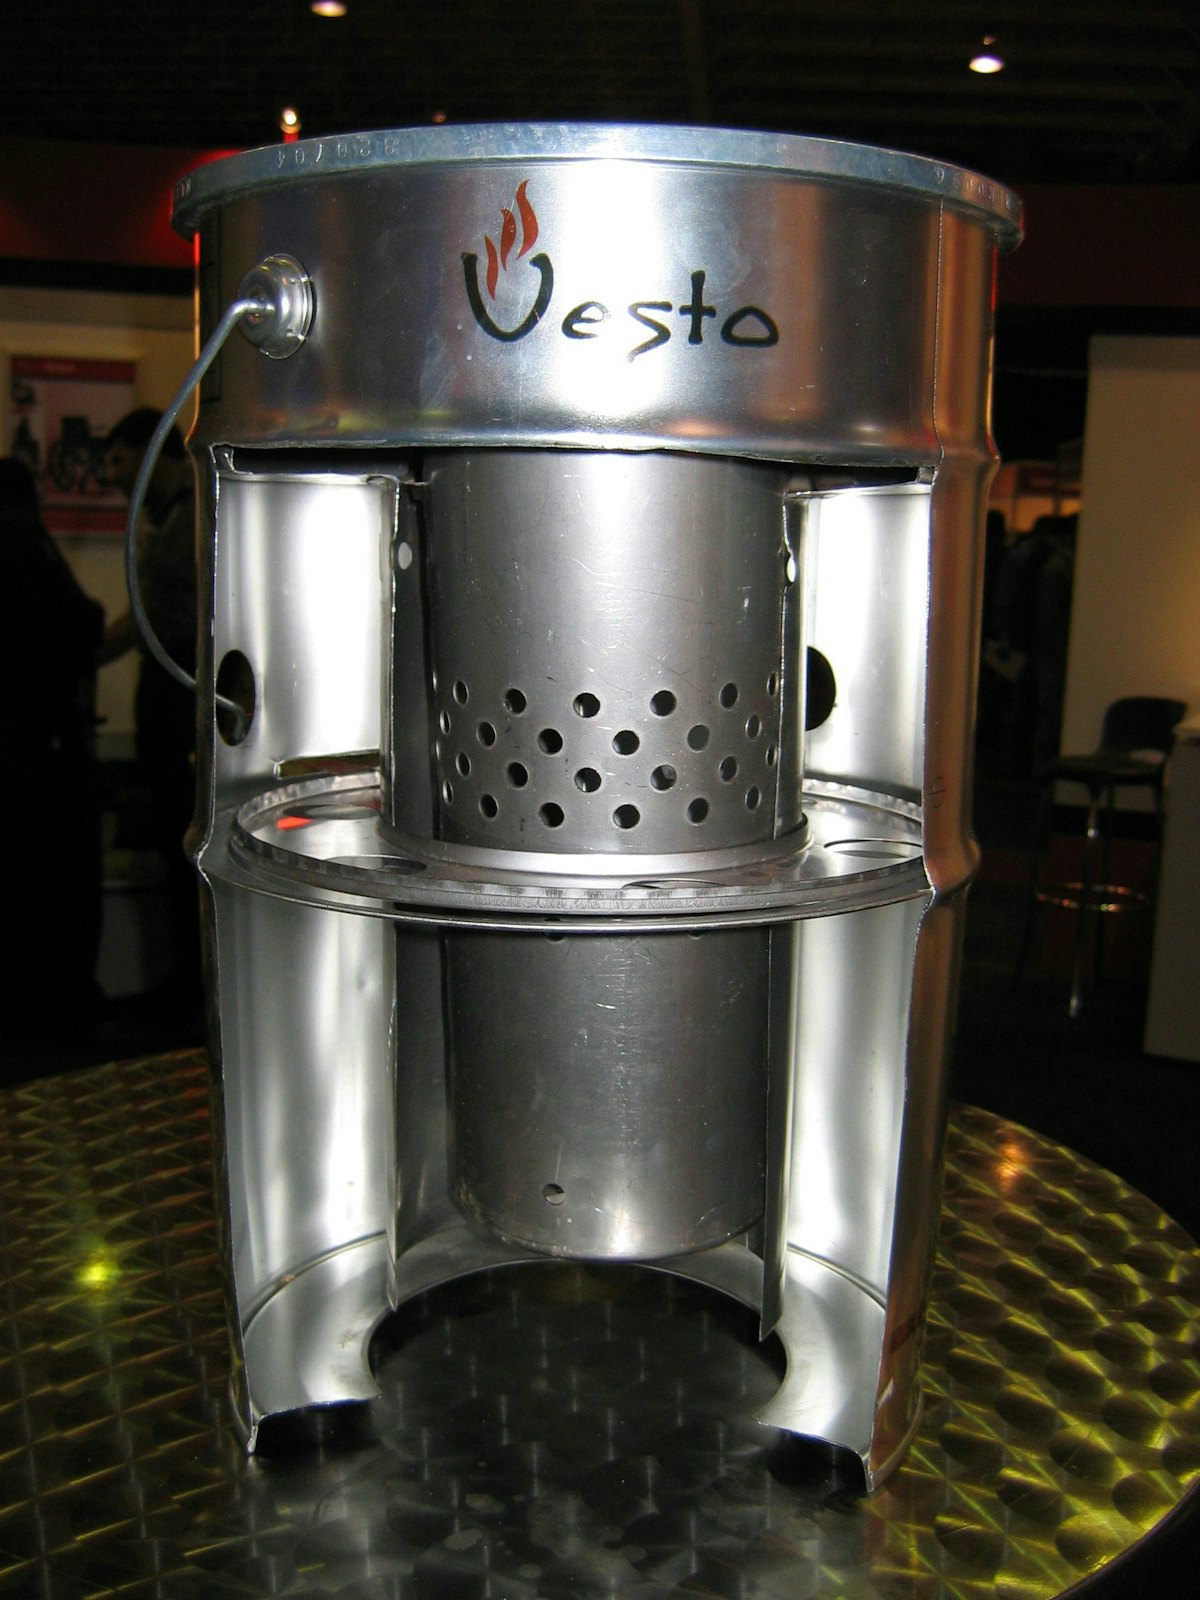 Cutaway model of the Vesto stove showing the chambers that preheat the incoming air, boosting the stove's efficiency.